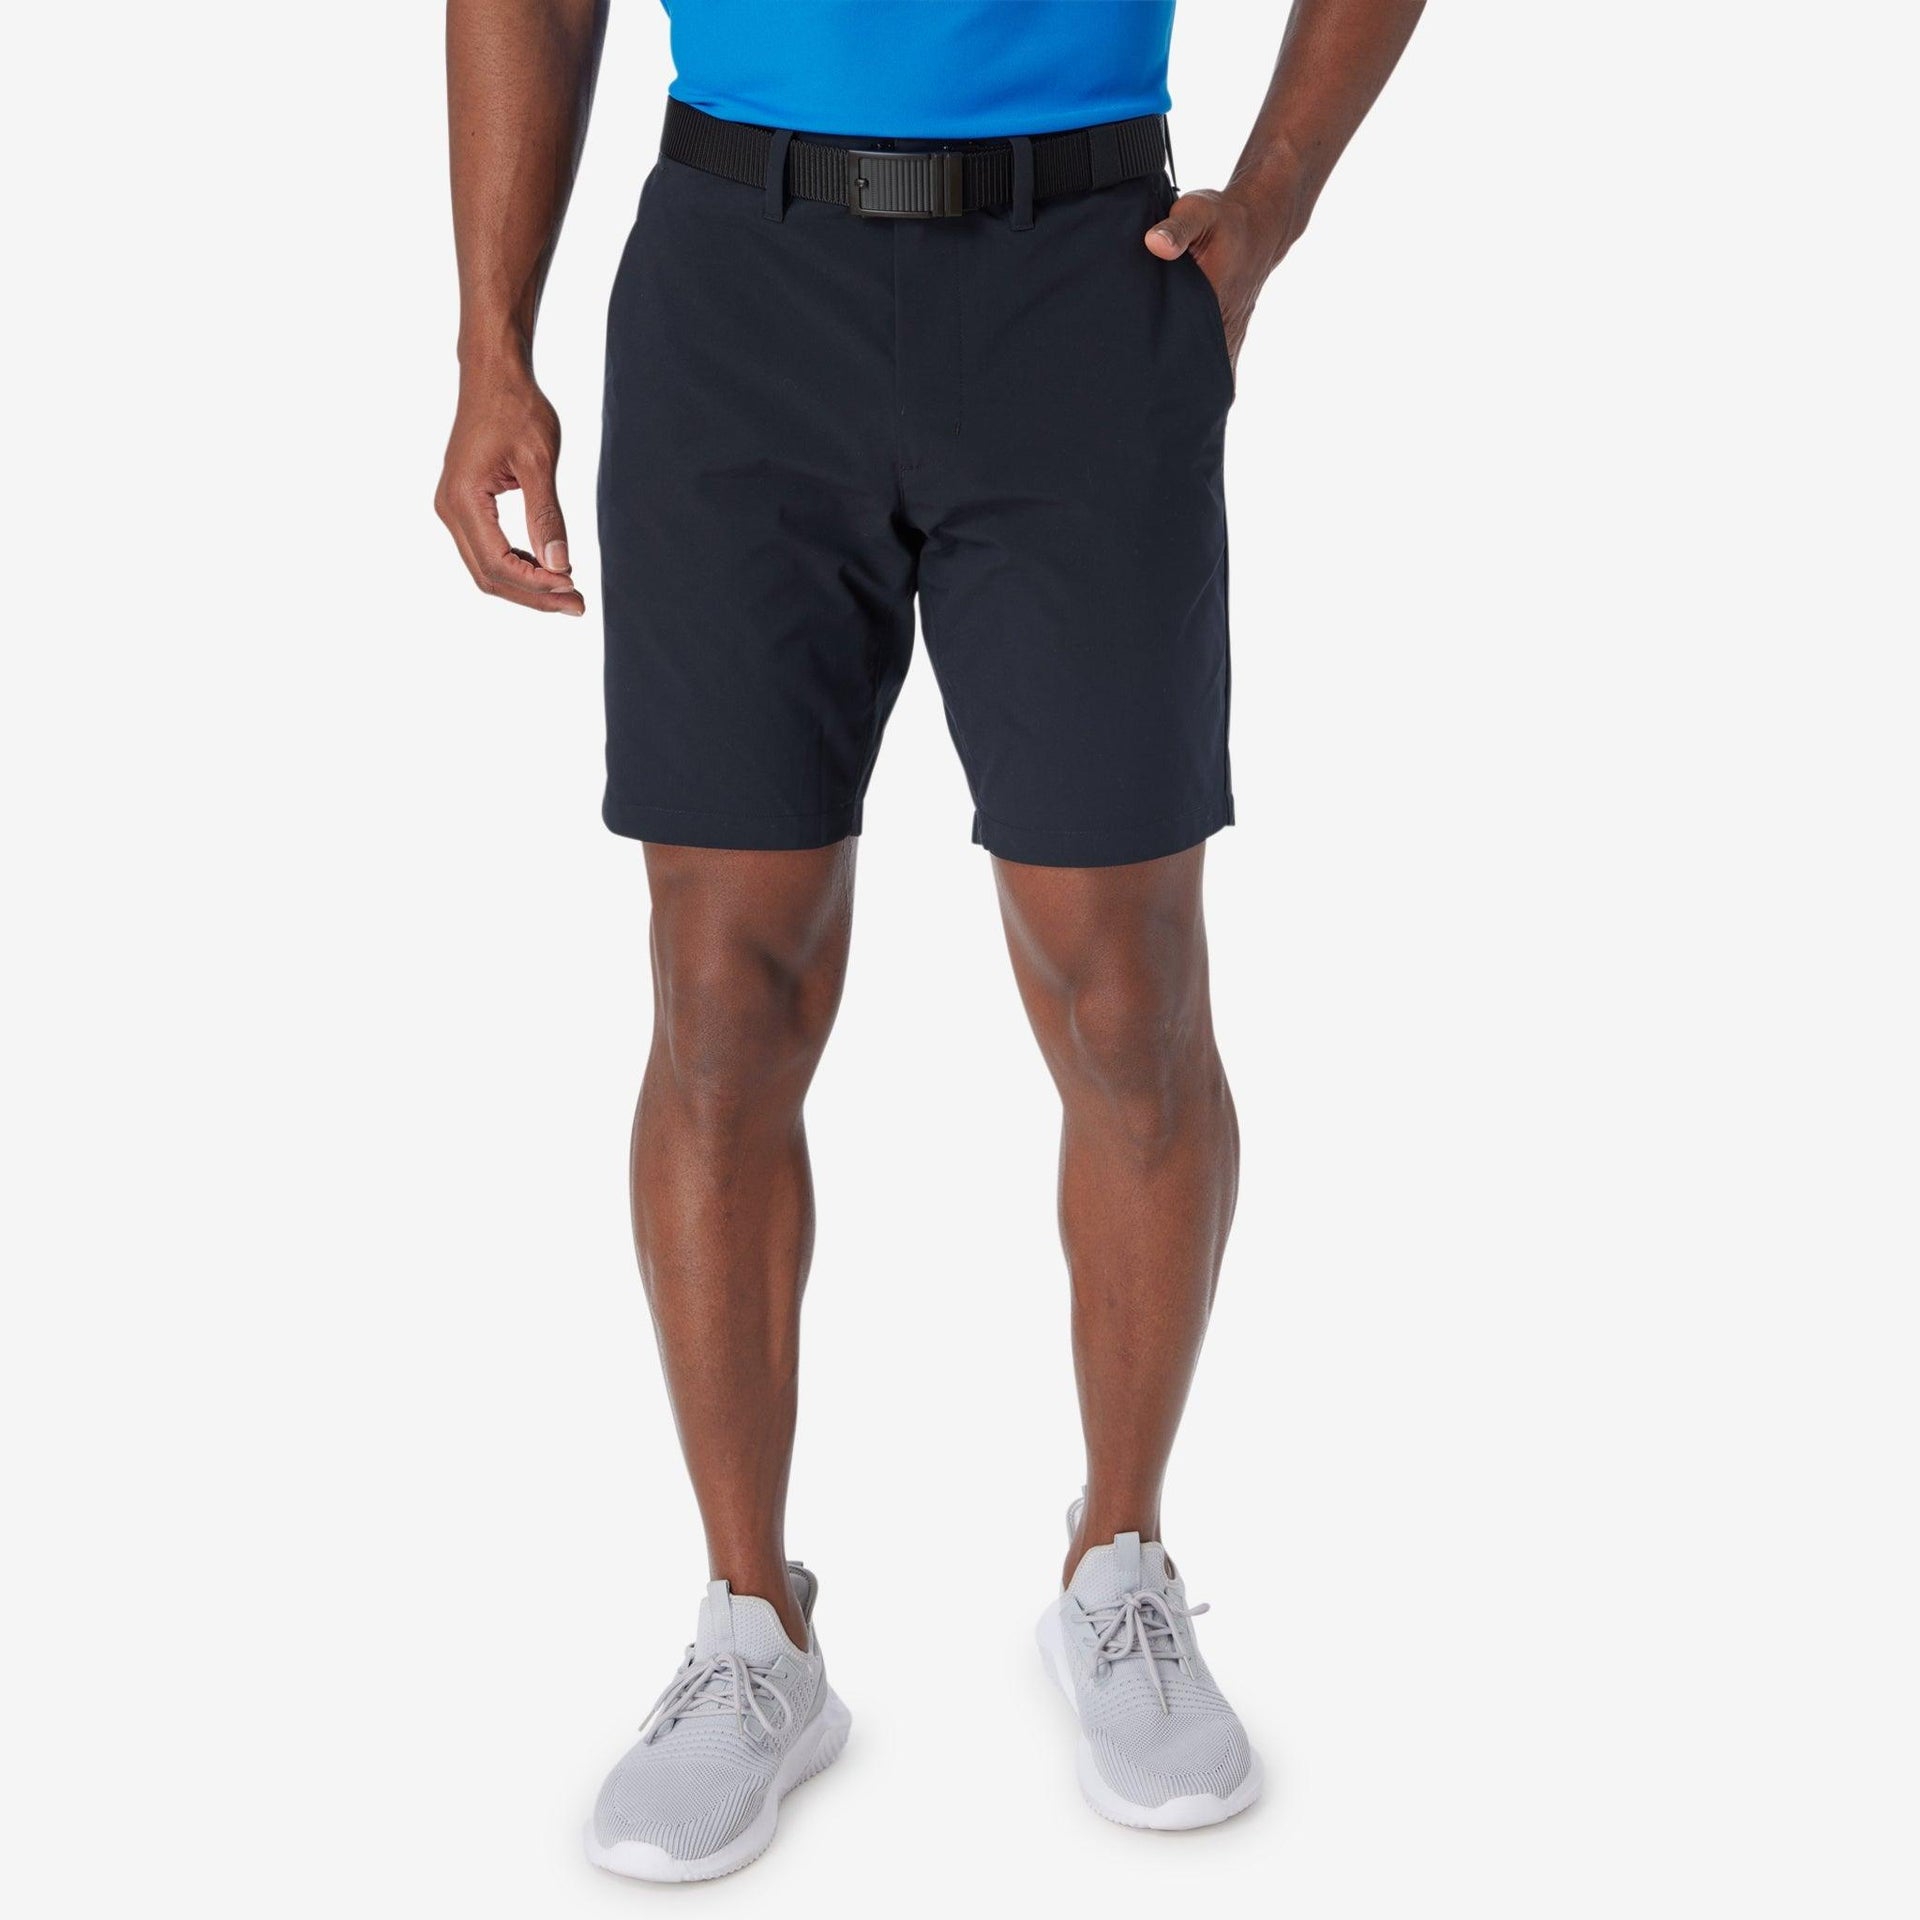 clubhouse short Black 34